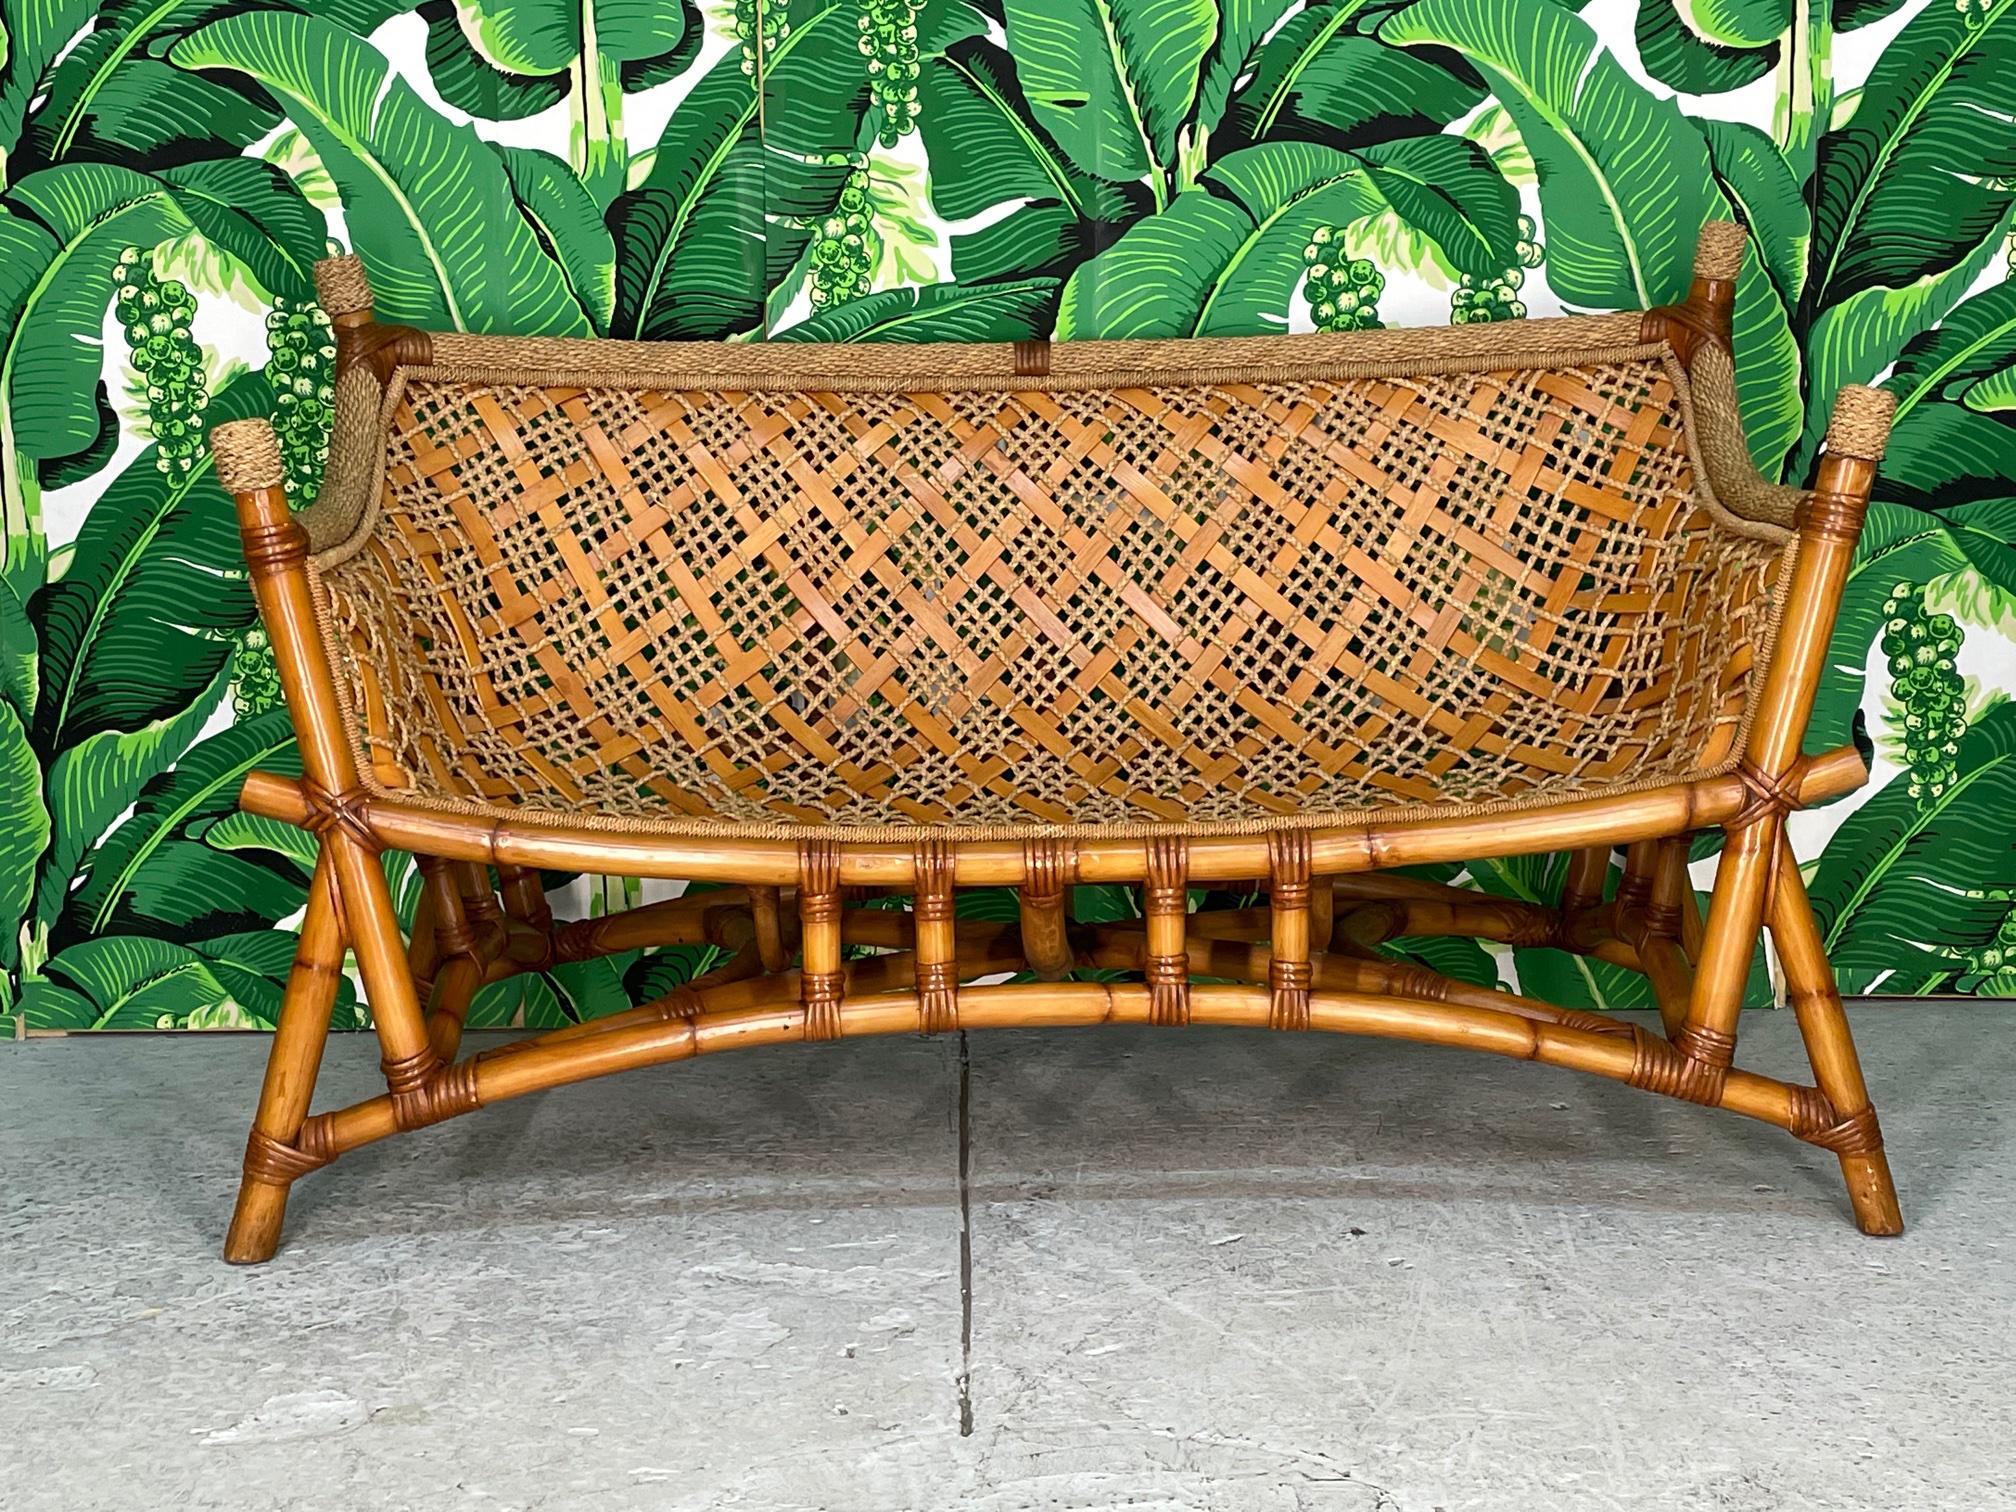 Unique vintage rattan bench sofa features a sling seat design and woven rope and reed detailing. Chinoiserie influence with it's pagoda style base and flared legs. Excellent condition with only very minor imperfections consistent with age.

 